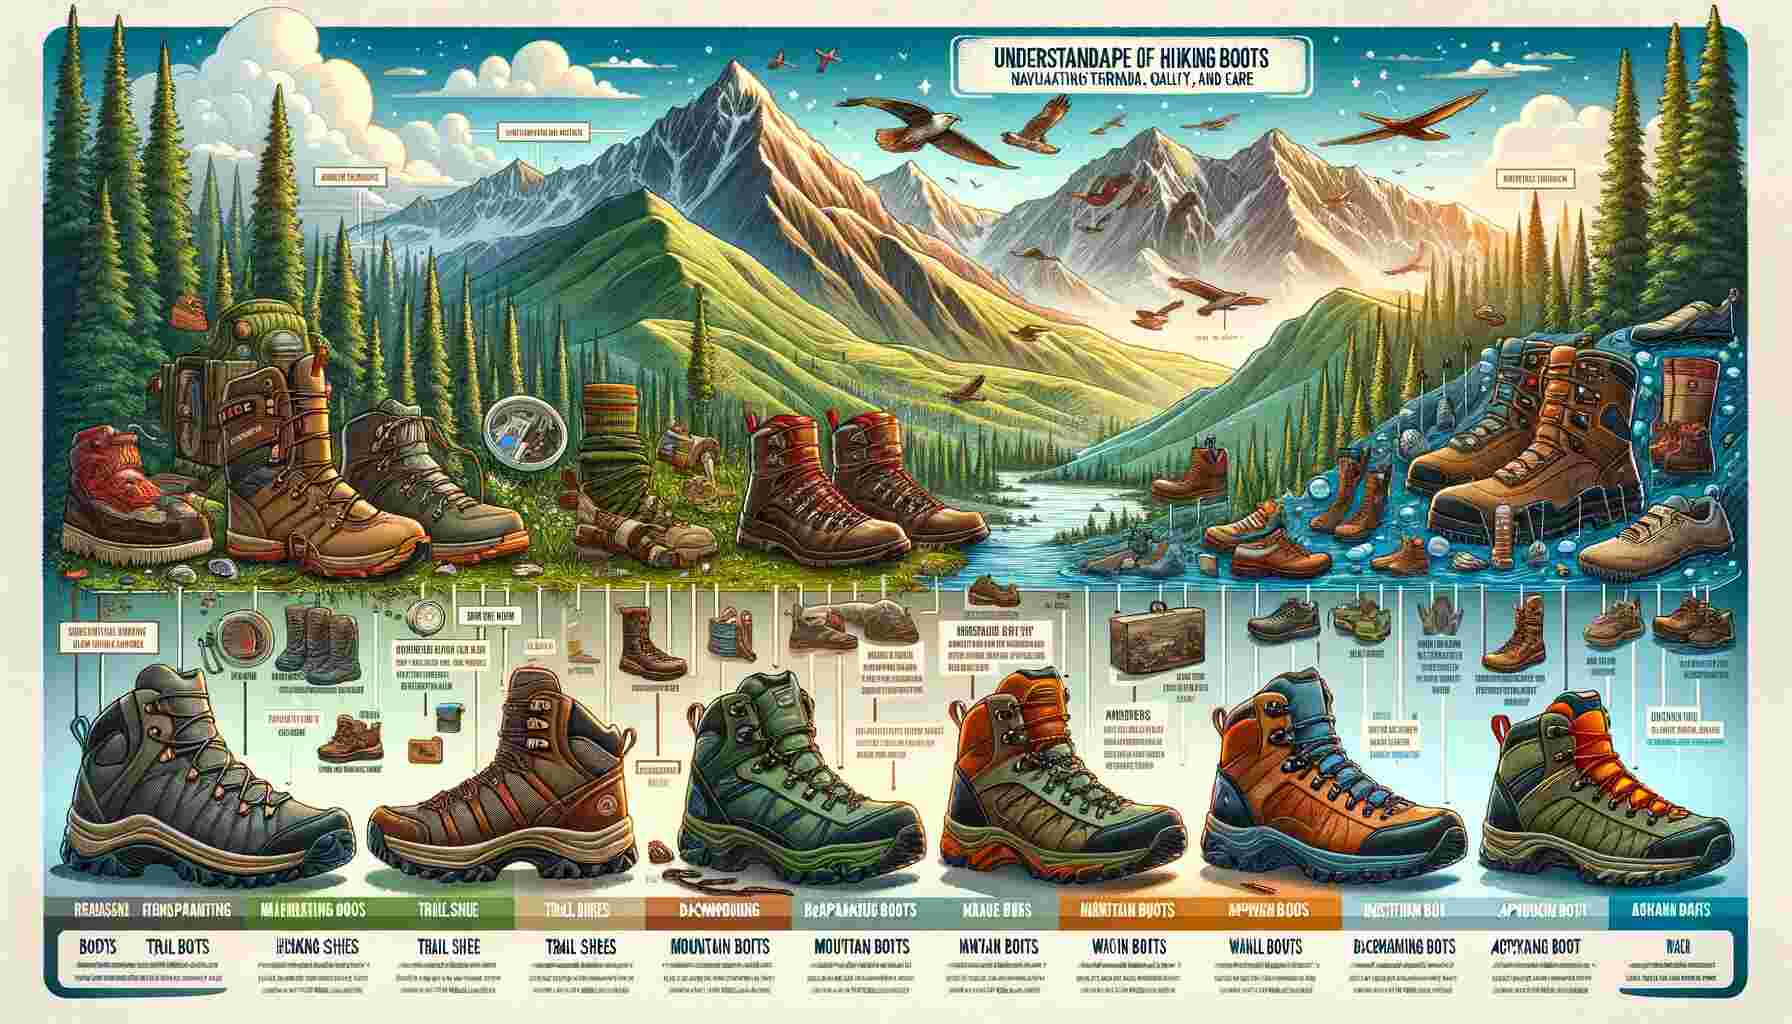 Here is the featured image for Cracking the Code: How Long Do Hiking Boots Really Last. This image visually represents the various aspects of hiking boots and their lifespan, set against a backdrop of diverse outdoor landscapes.